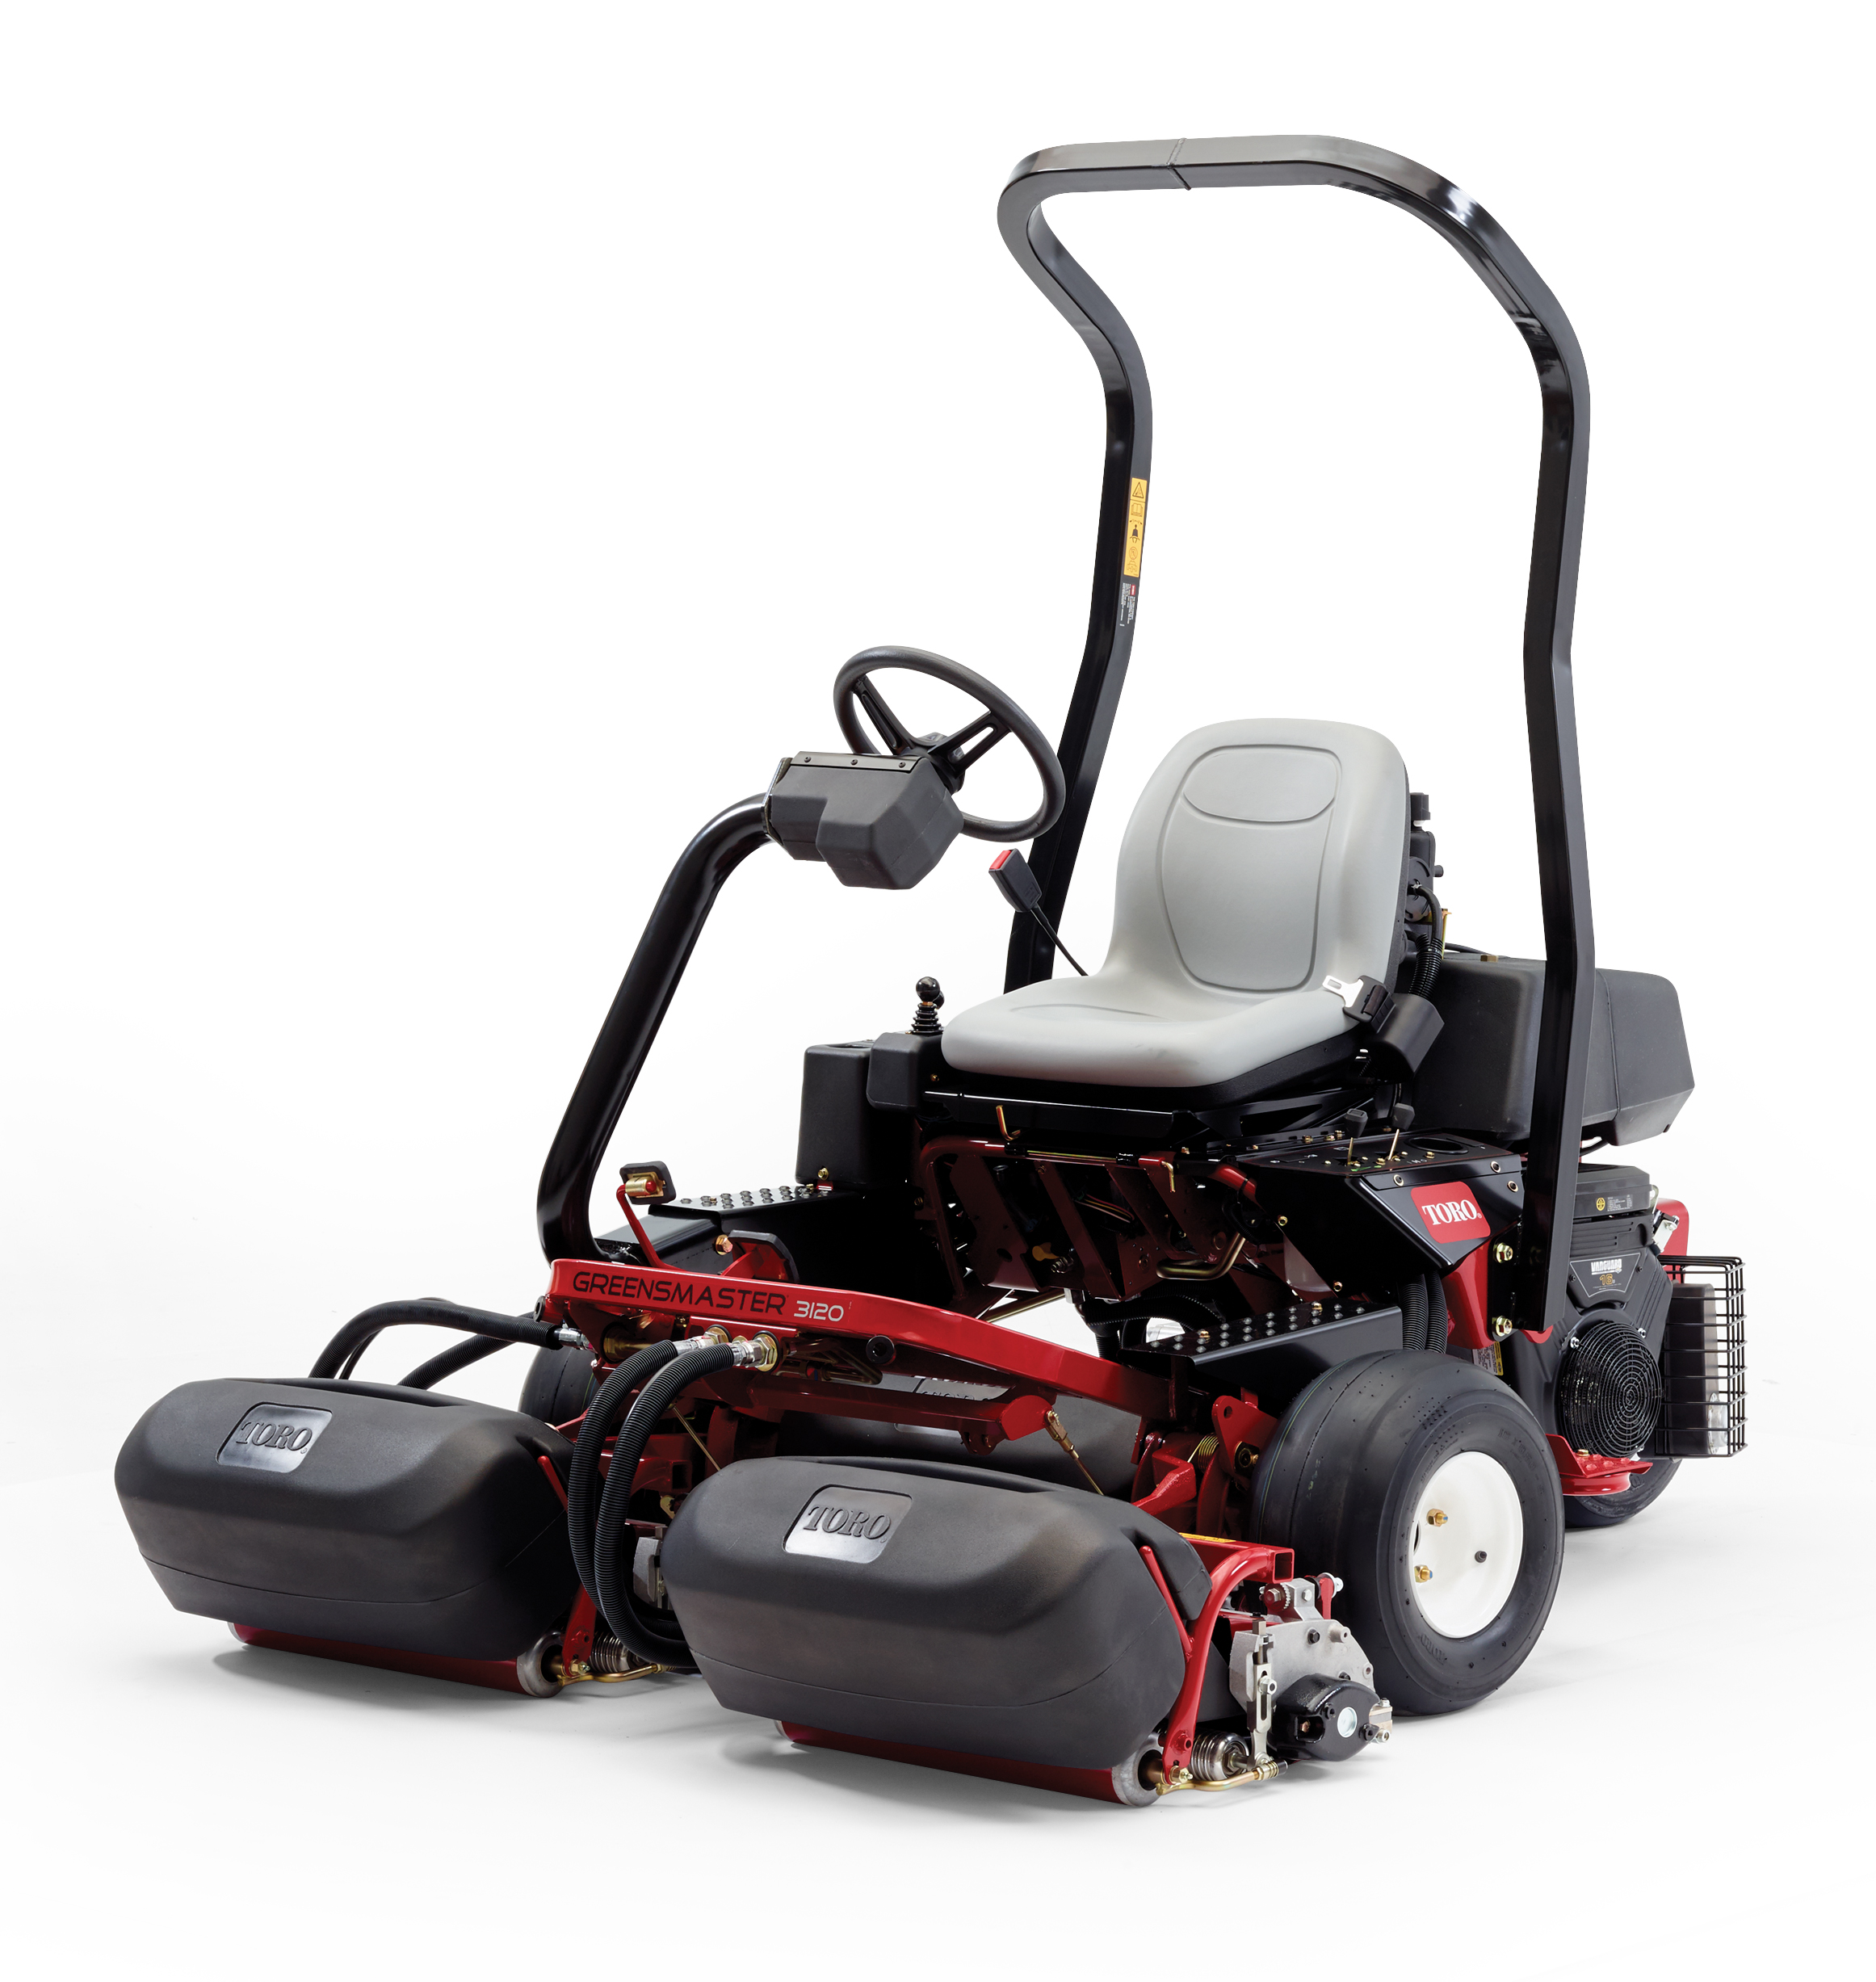 New Toro Greensmaster® 3120 Ride-on Mower is highly productive at an attractive price